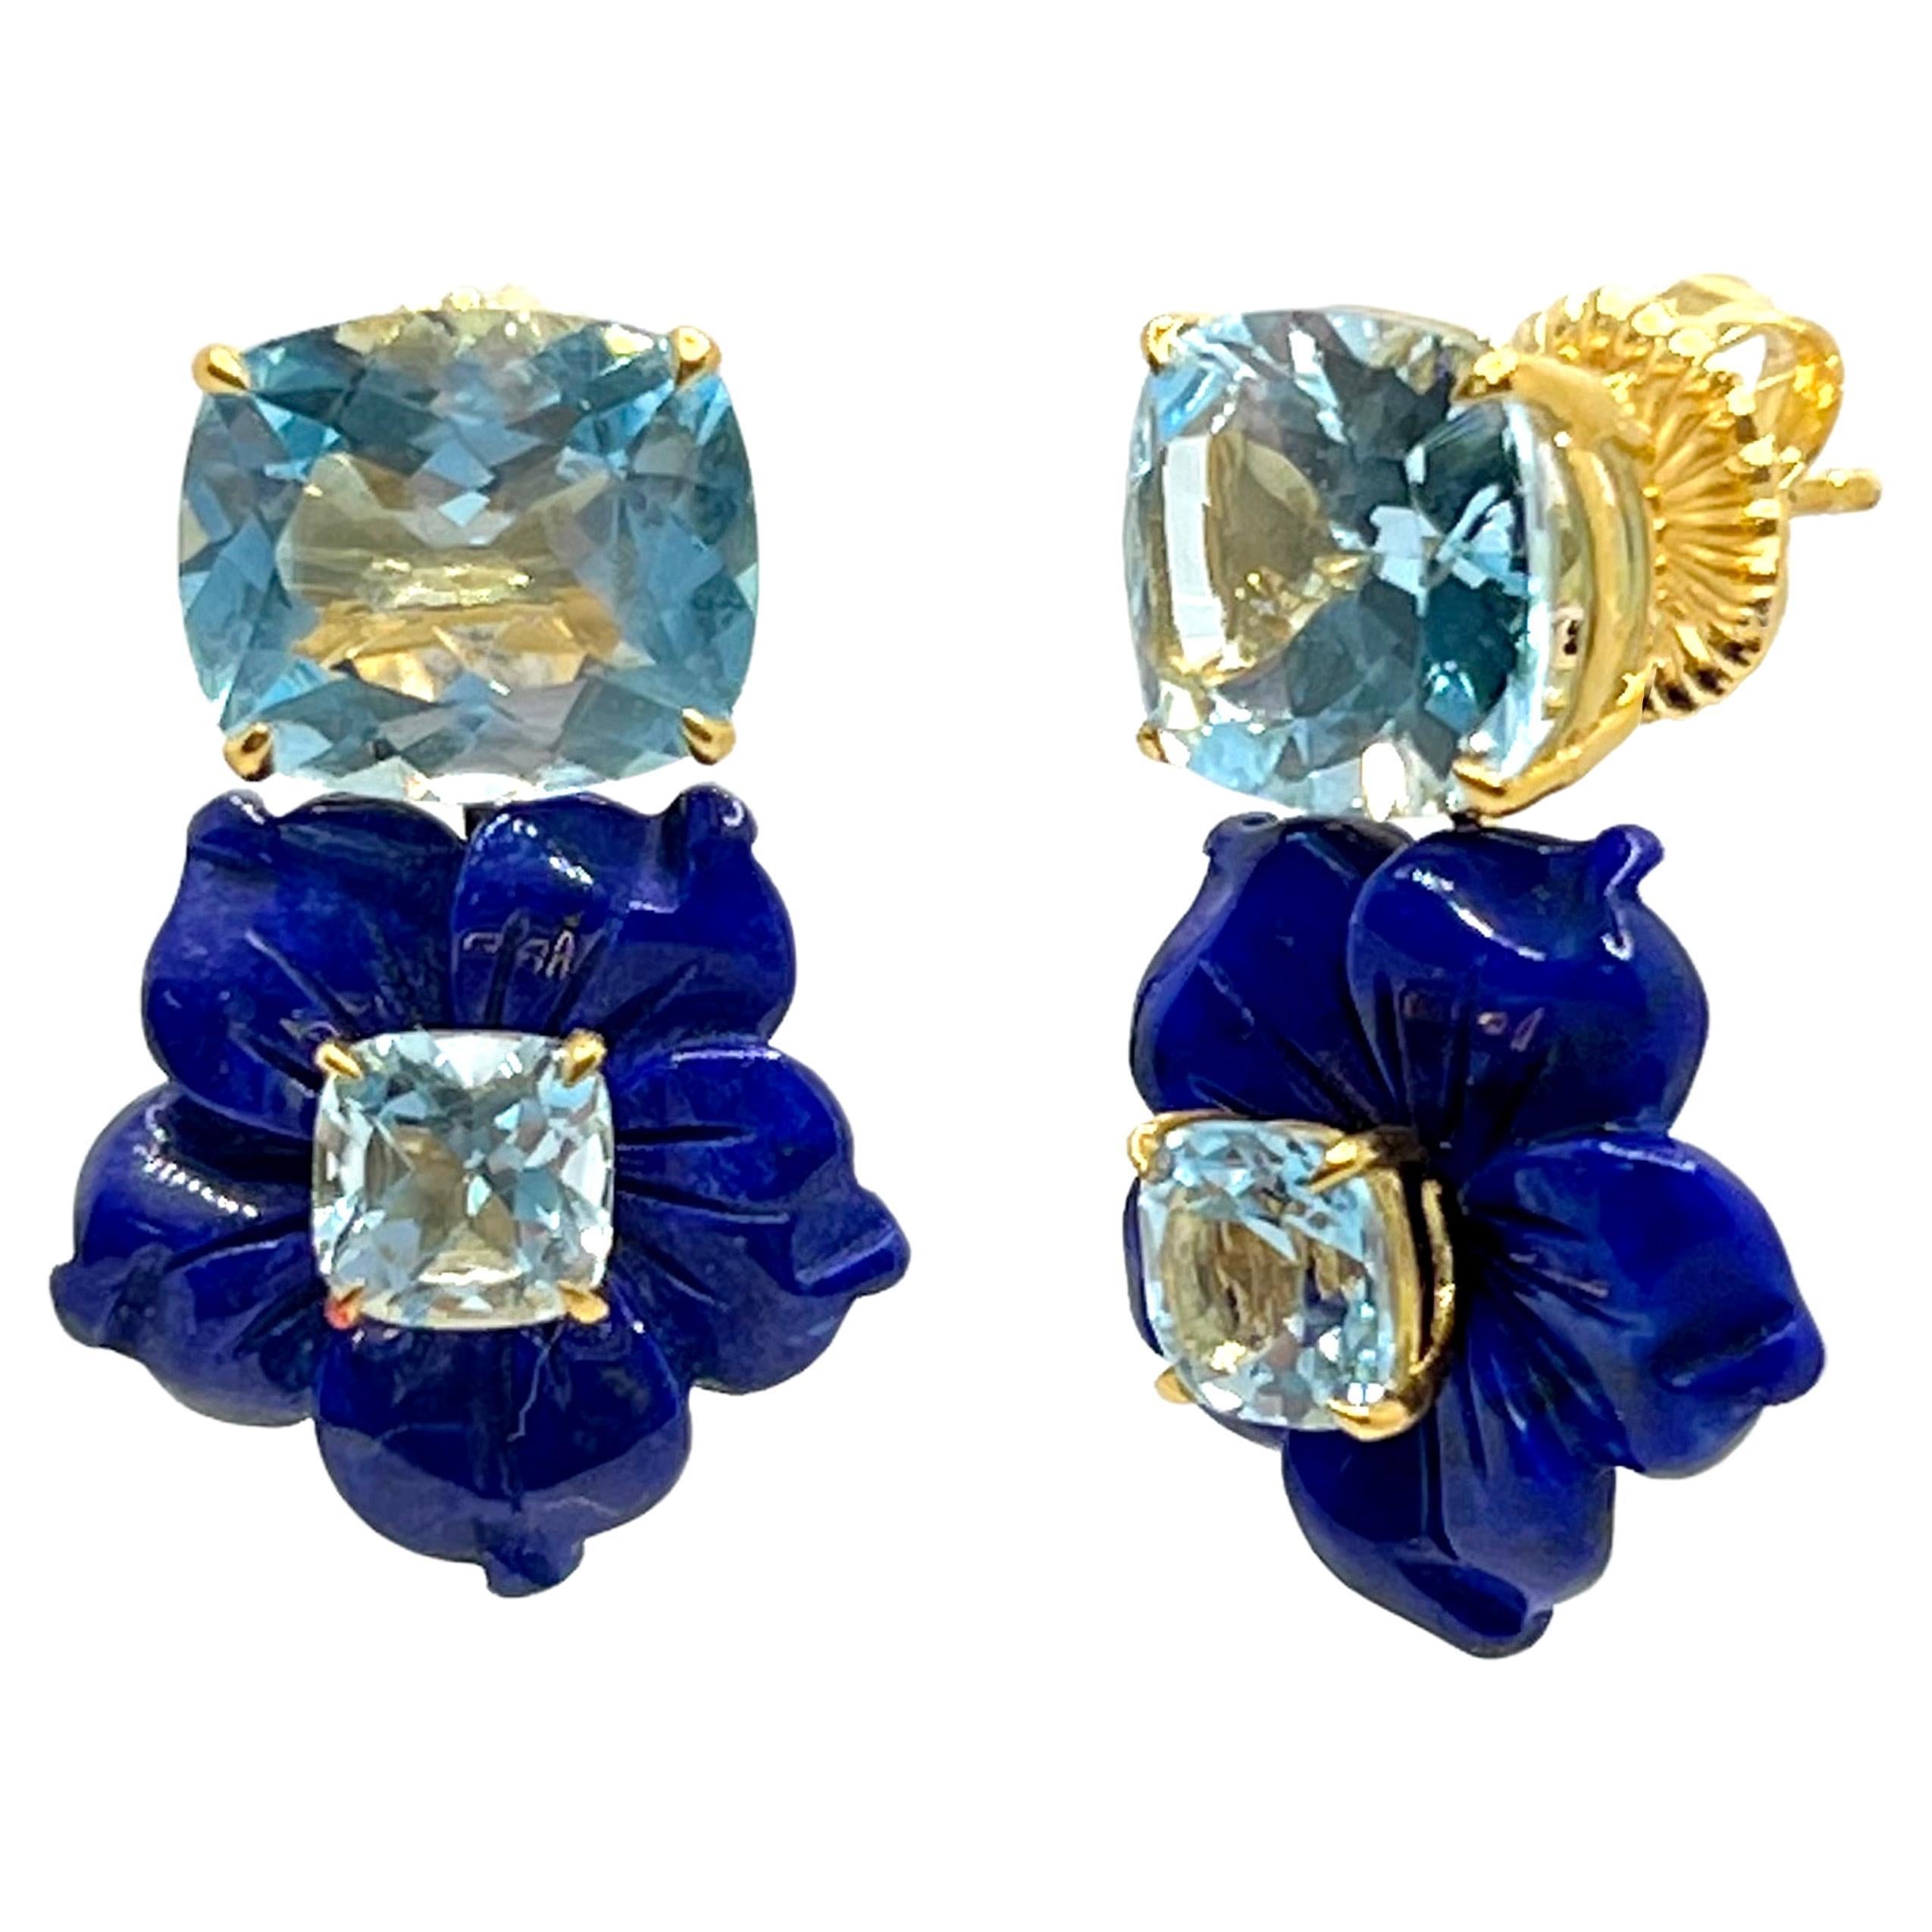 Stunning Cushion-cut Blue Topaz and Carved Lapis Lazuli Flower Drop Earrings For Sale